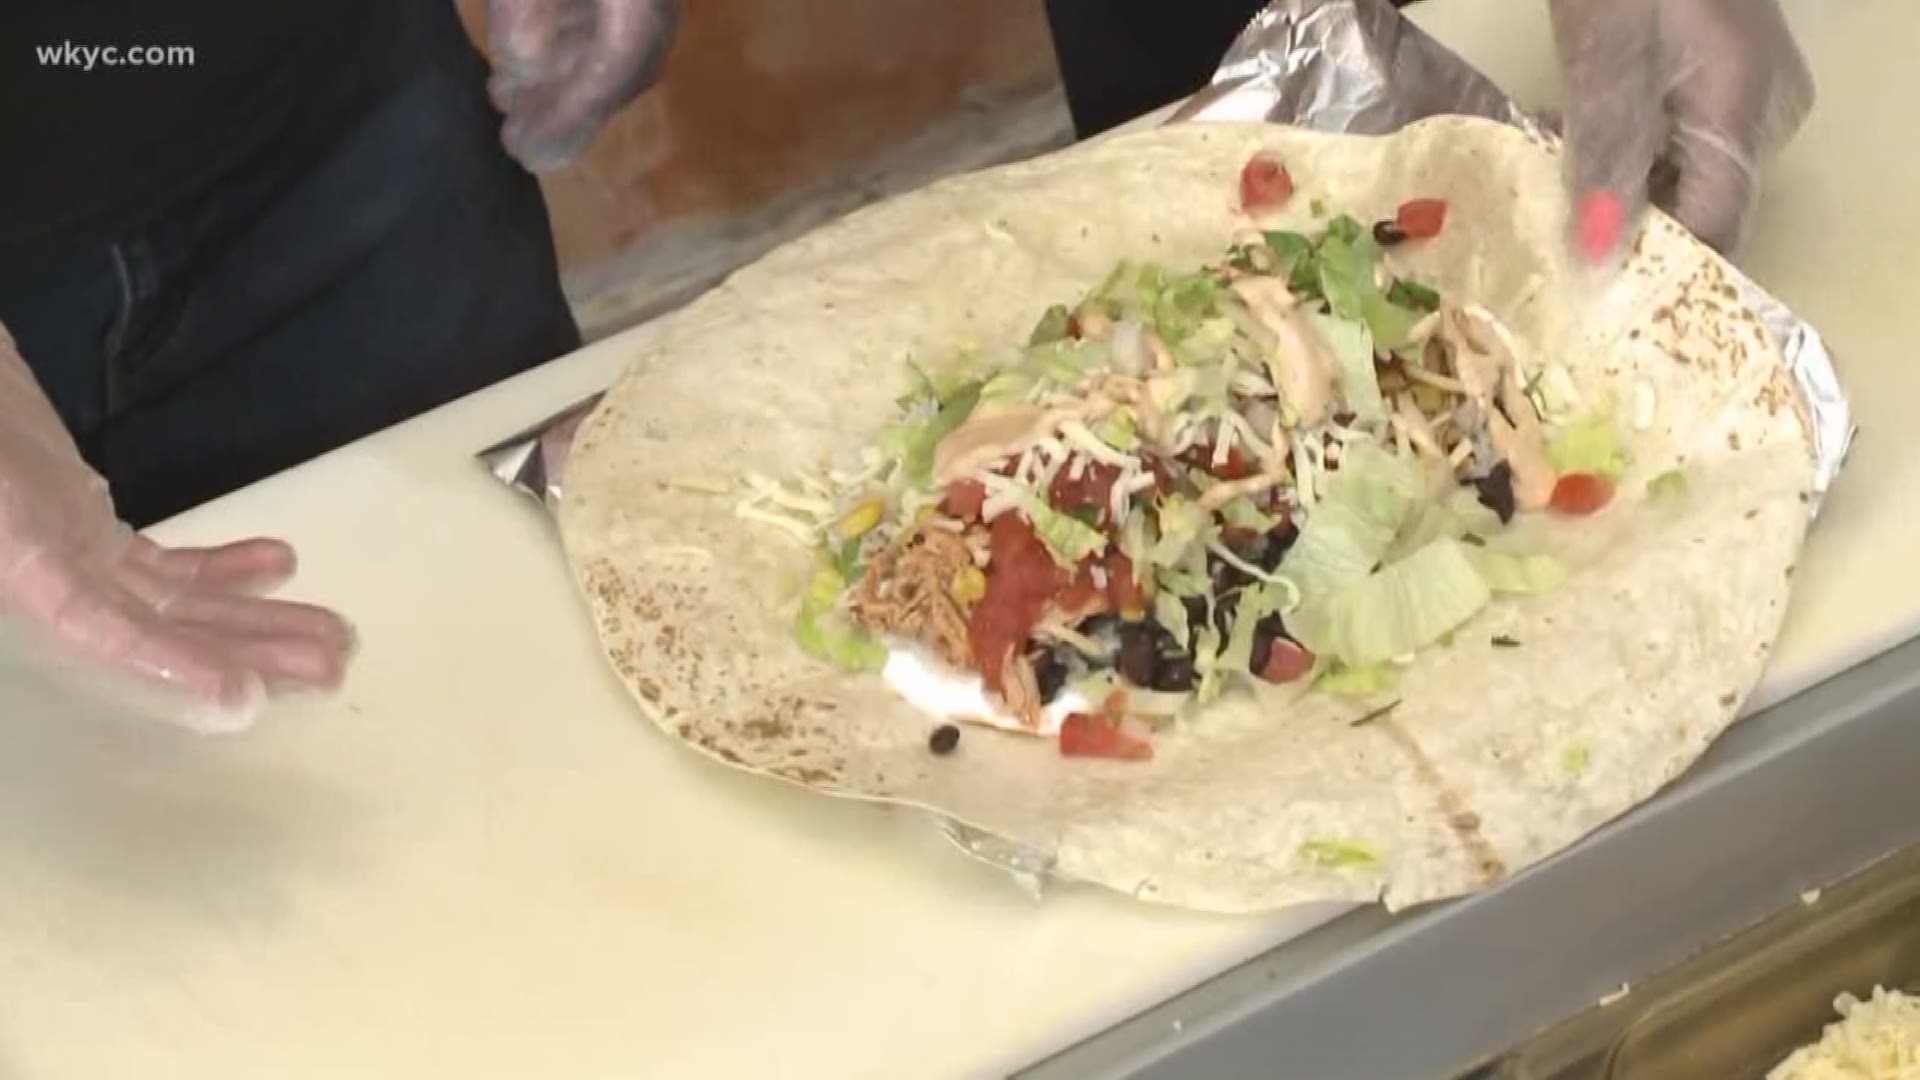 April 4, 2019: Looking to make the perfect meal for National Burrito Day? We went to the experts at Ohio City Burrito for the top secrets when crafting your burrito.